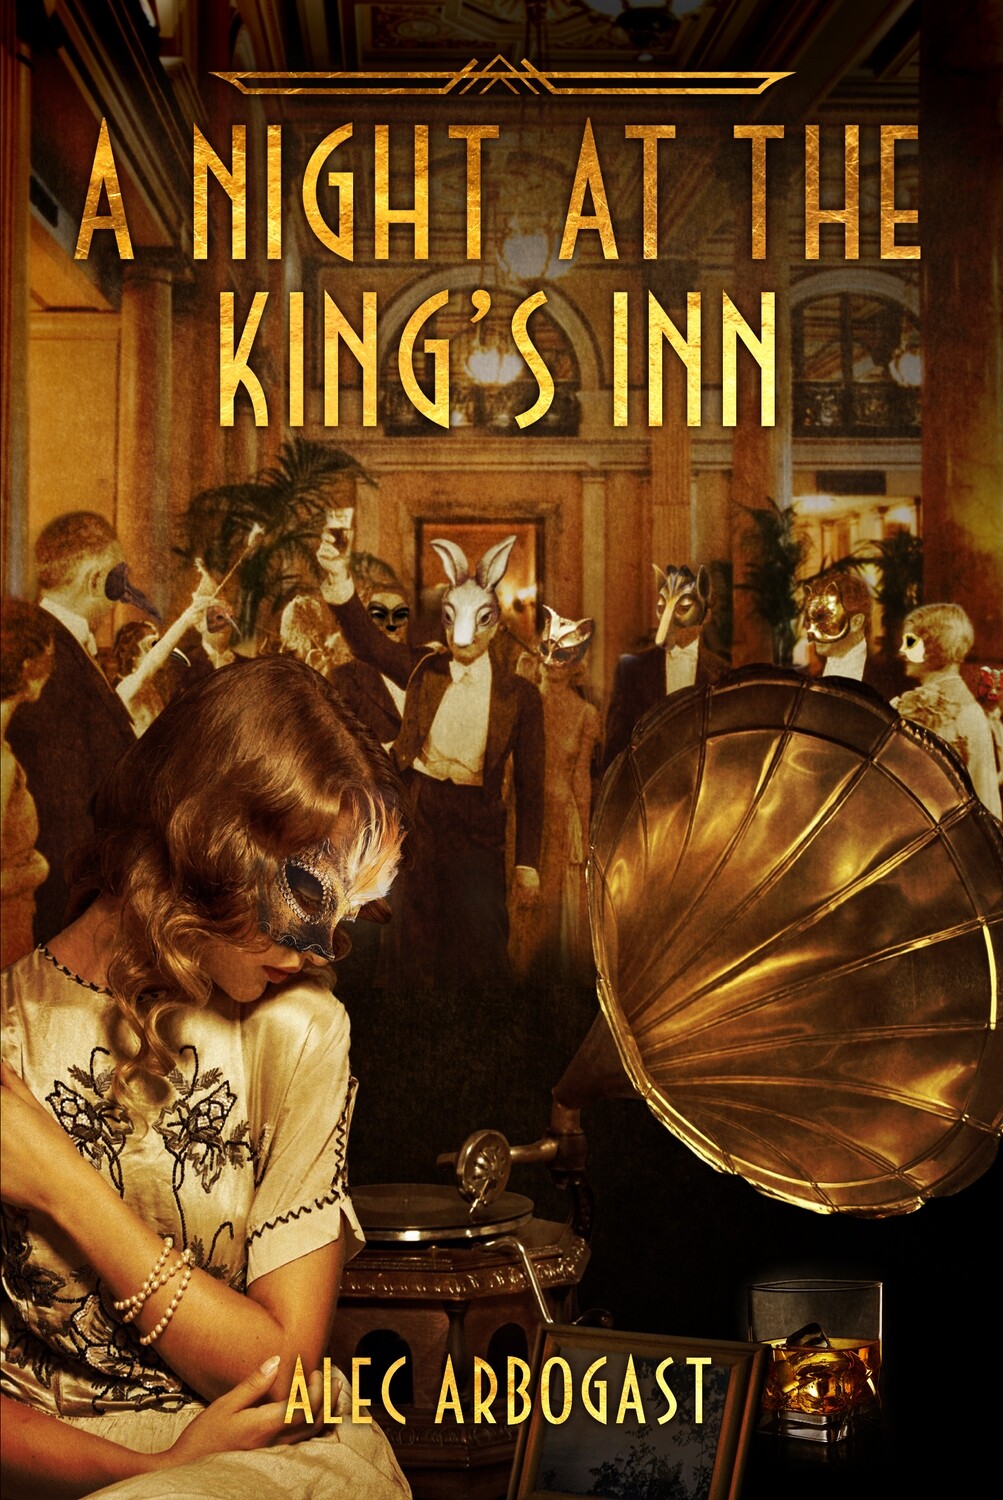 A Night at the King's Inn